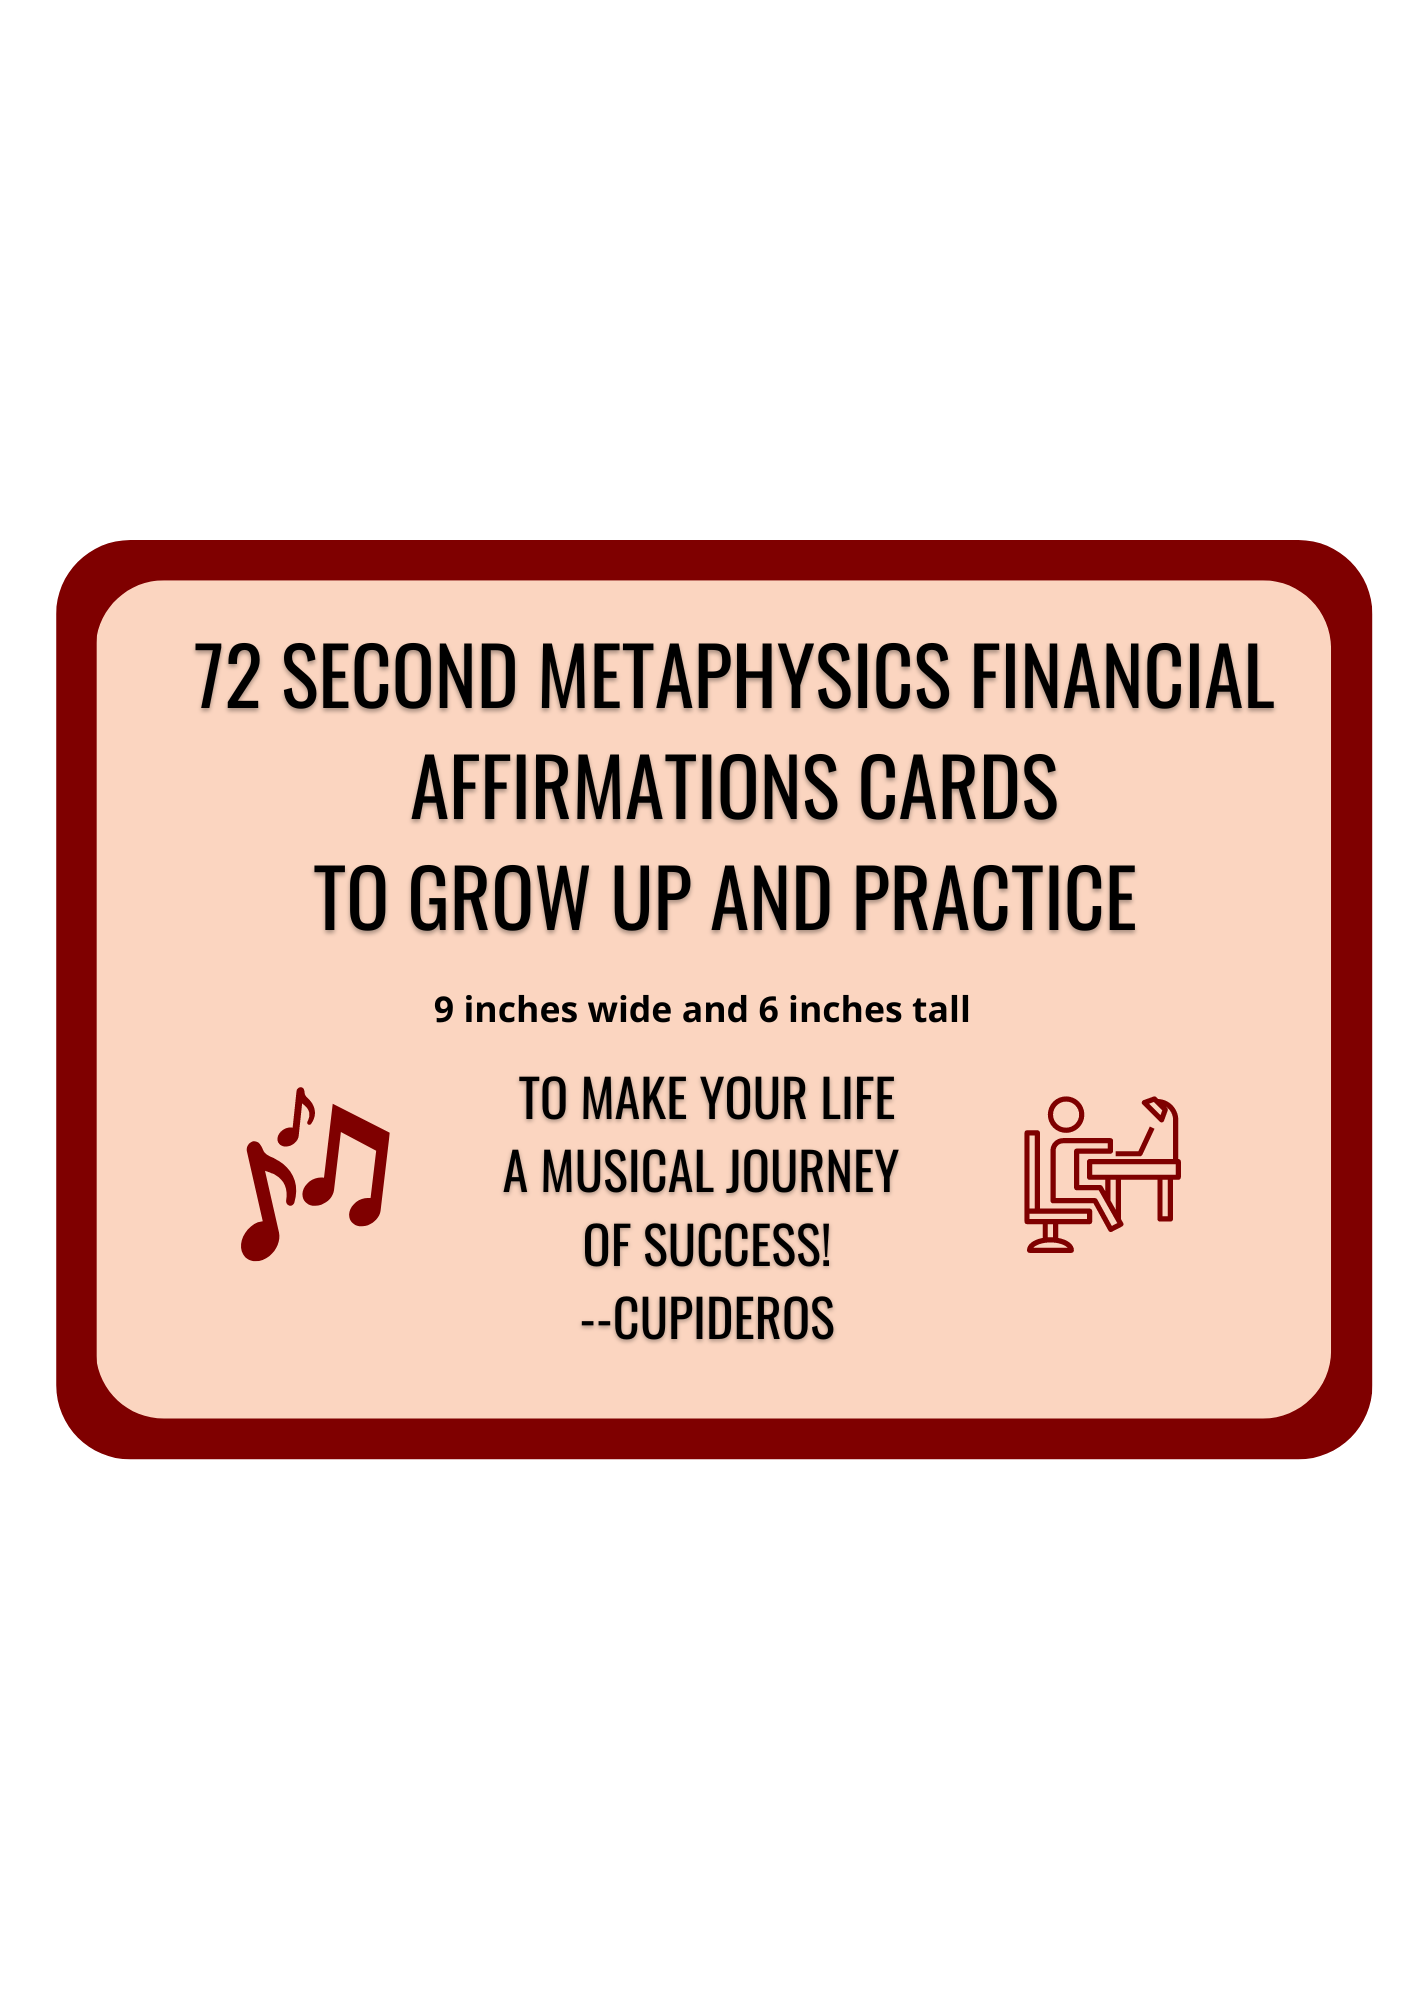 VIDEO ABYSSARIANISM SECOND METAPHYSICS AFFIRMATION CARDS